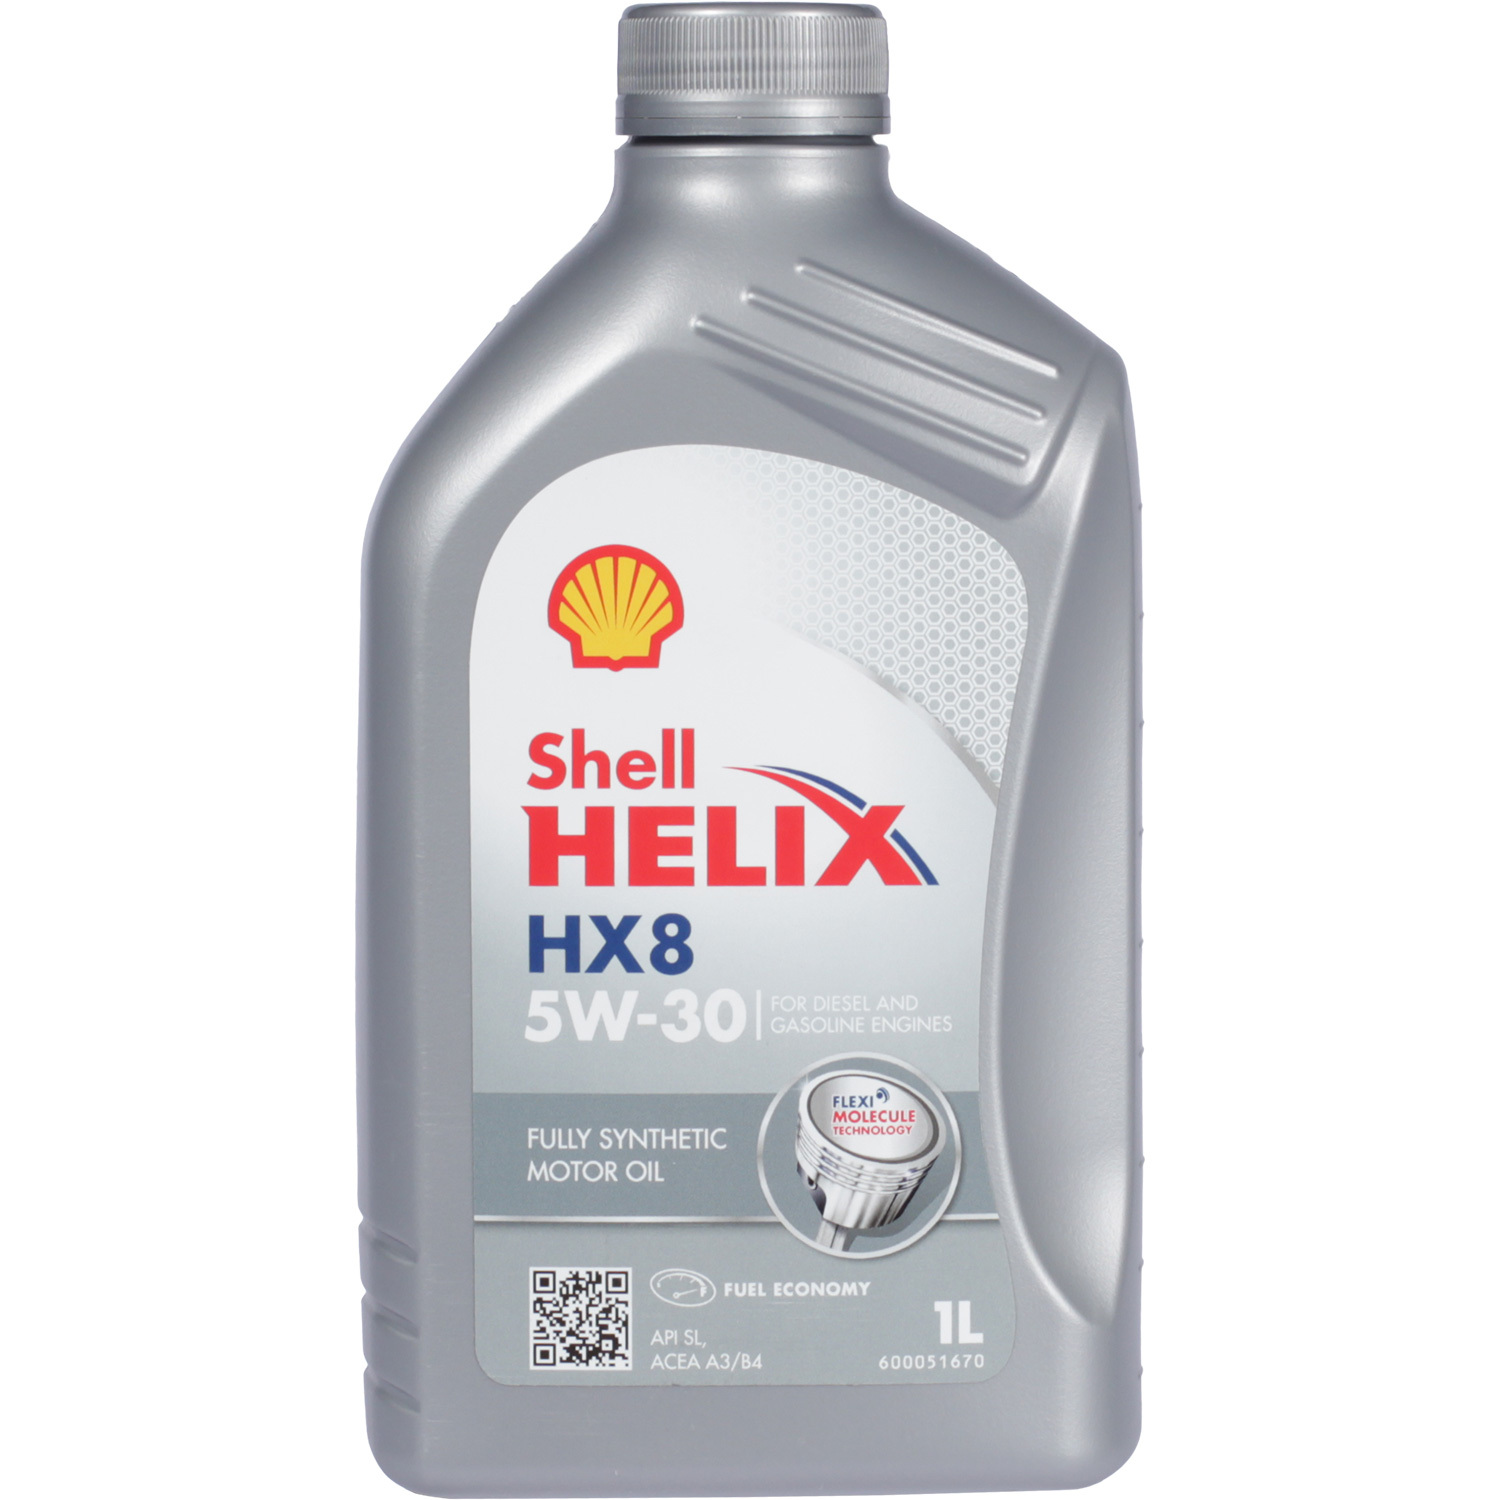 Shell Моторное масло Shell Helix HX8 5W-30, 1 л масло моторное shell helix ultra 5w 40 1 л 550040754